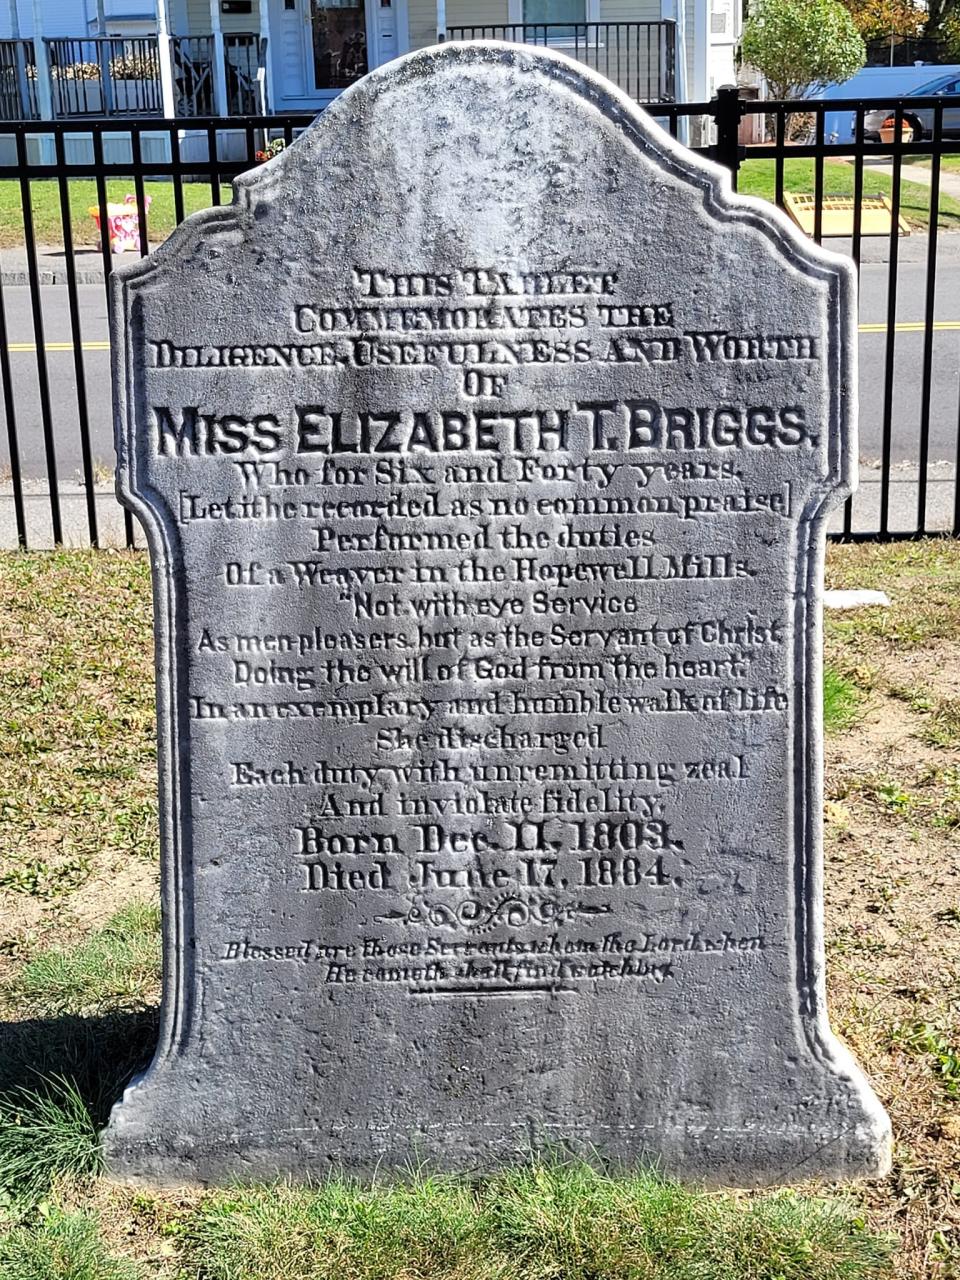 This headstone is a testament to Elizabeth Briggs' 46 years of dedicated work at the Hopewell Mills. It reads in part: "This Tablet Commemorates The Diligence, Usefulness And Worth Of Miss Elizabeth T. Briggs, Who for Six and Forty years, [Let it be recorded as no common praise] Performed the duties Of a Weaver in the Hopewell Mills. .... She discharged Each duty with unremitting zeal And inviolate fidelity."